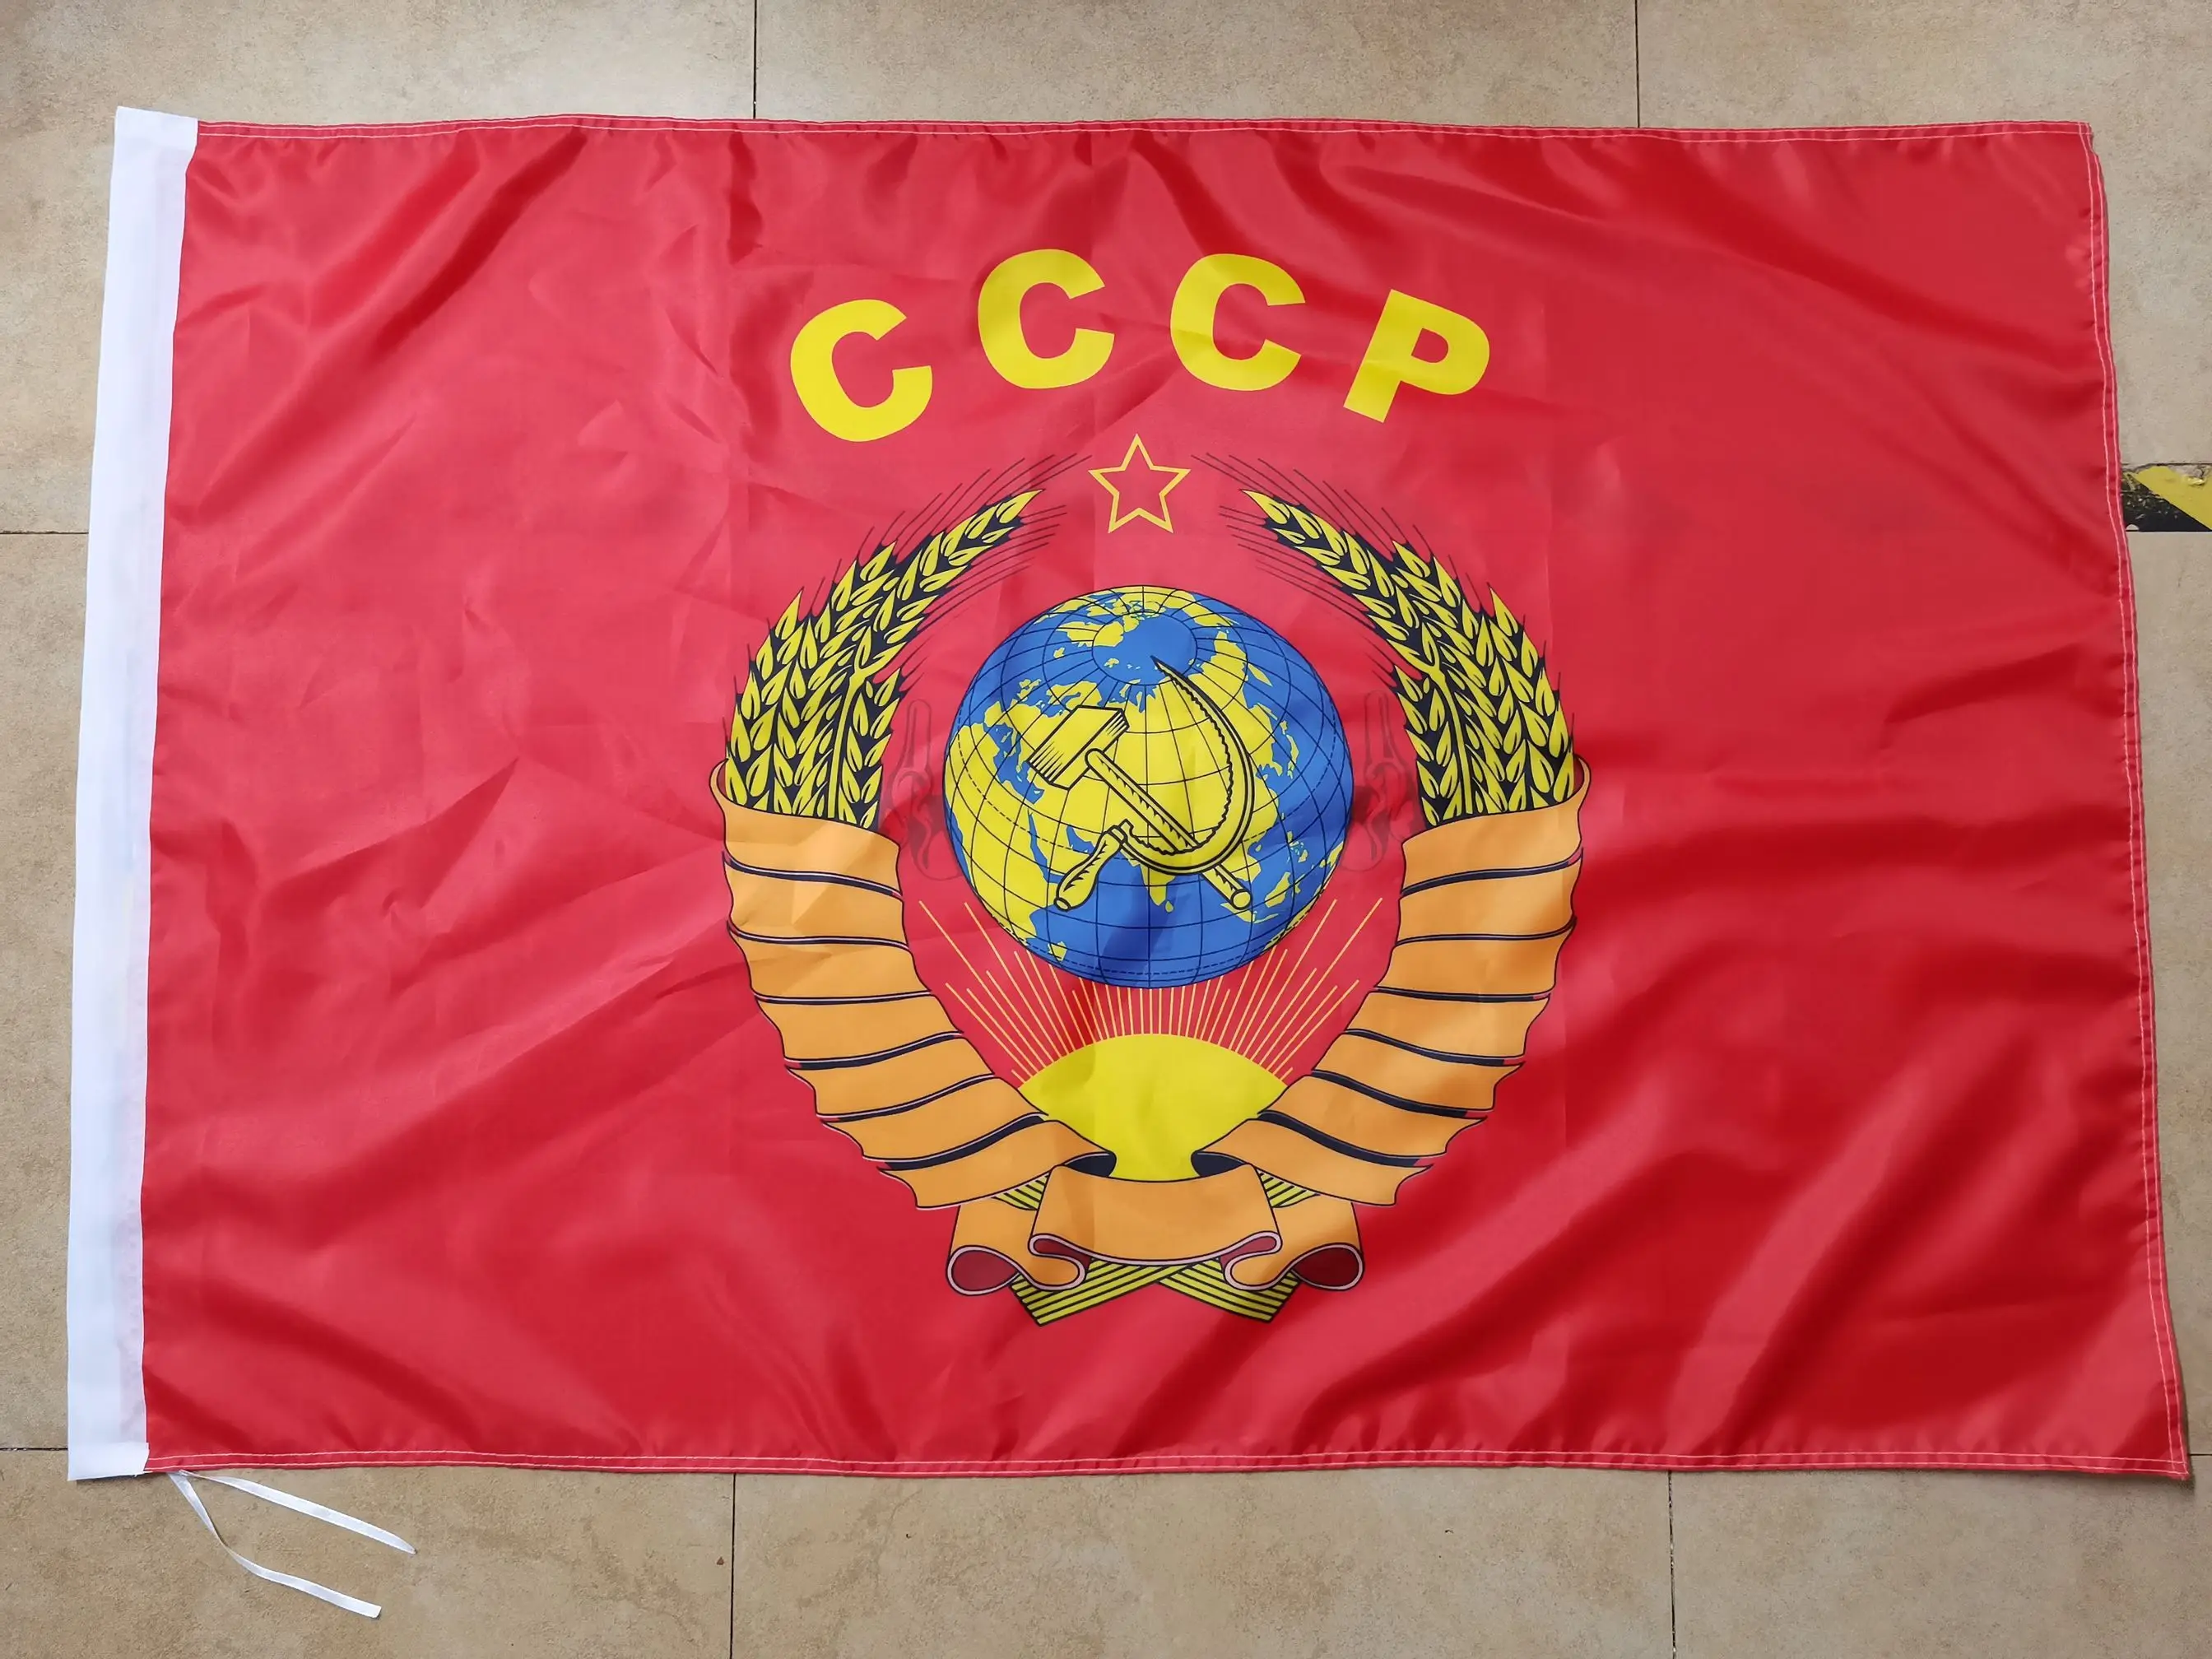 Russia 1993 Flag 90x150cm 3x5ft Banner 115g The Russian Federation Moscow -  Flags - AliExpress